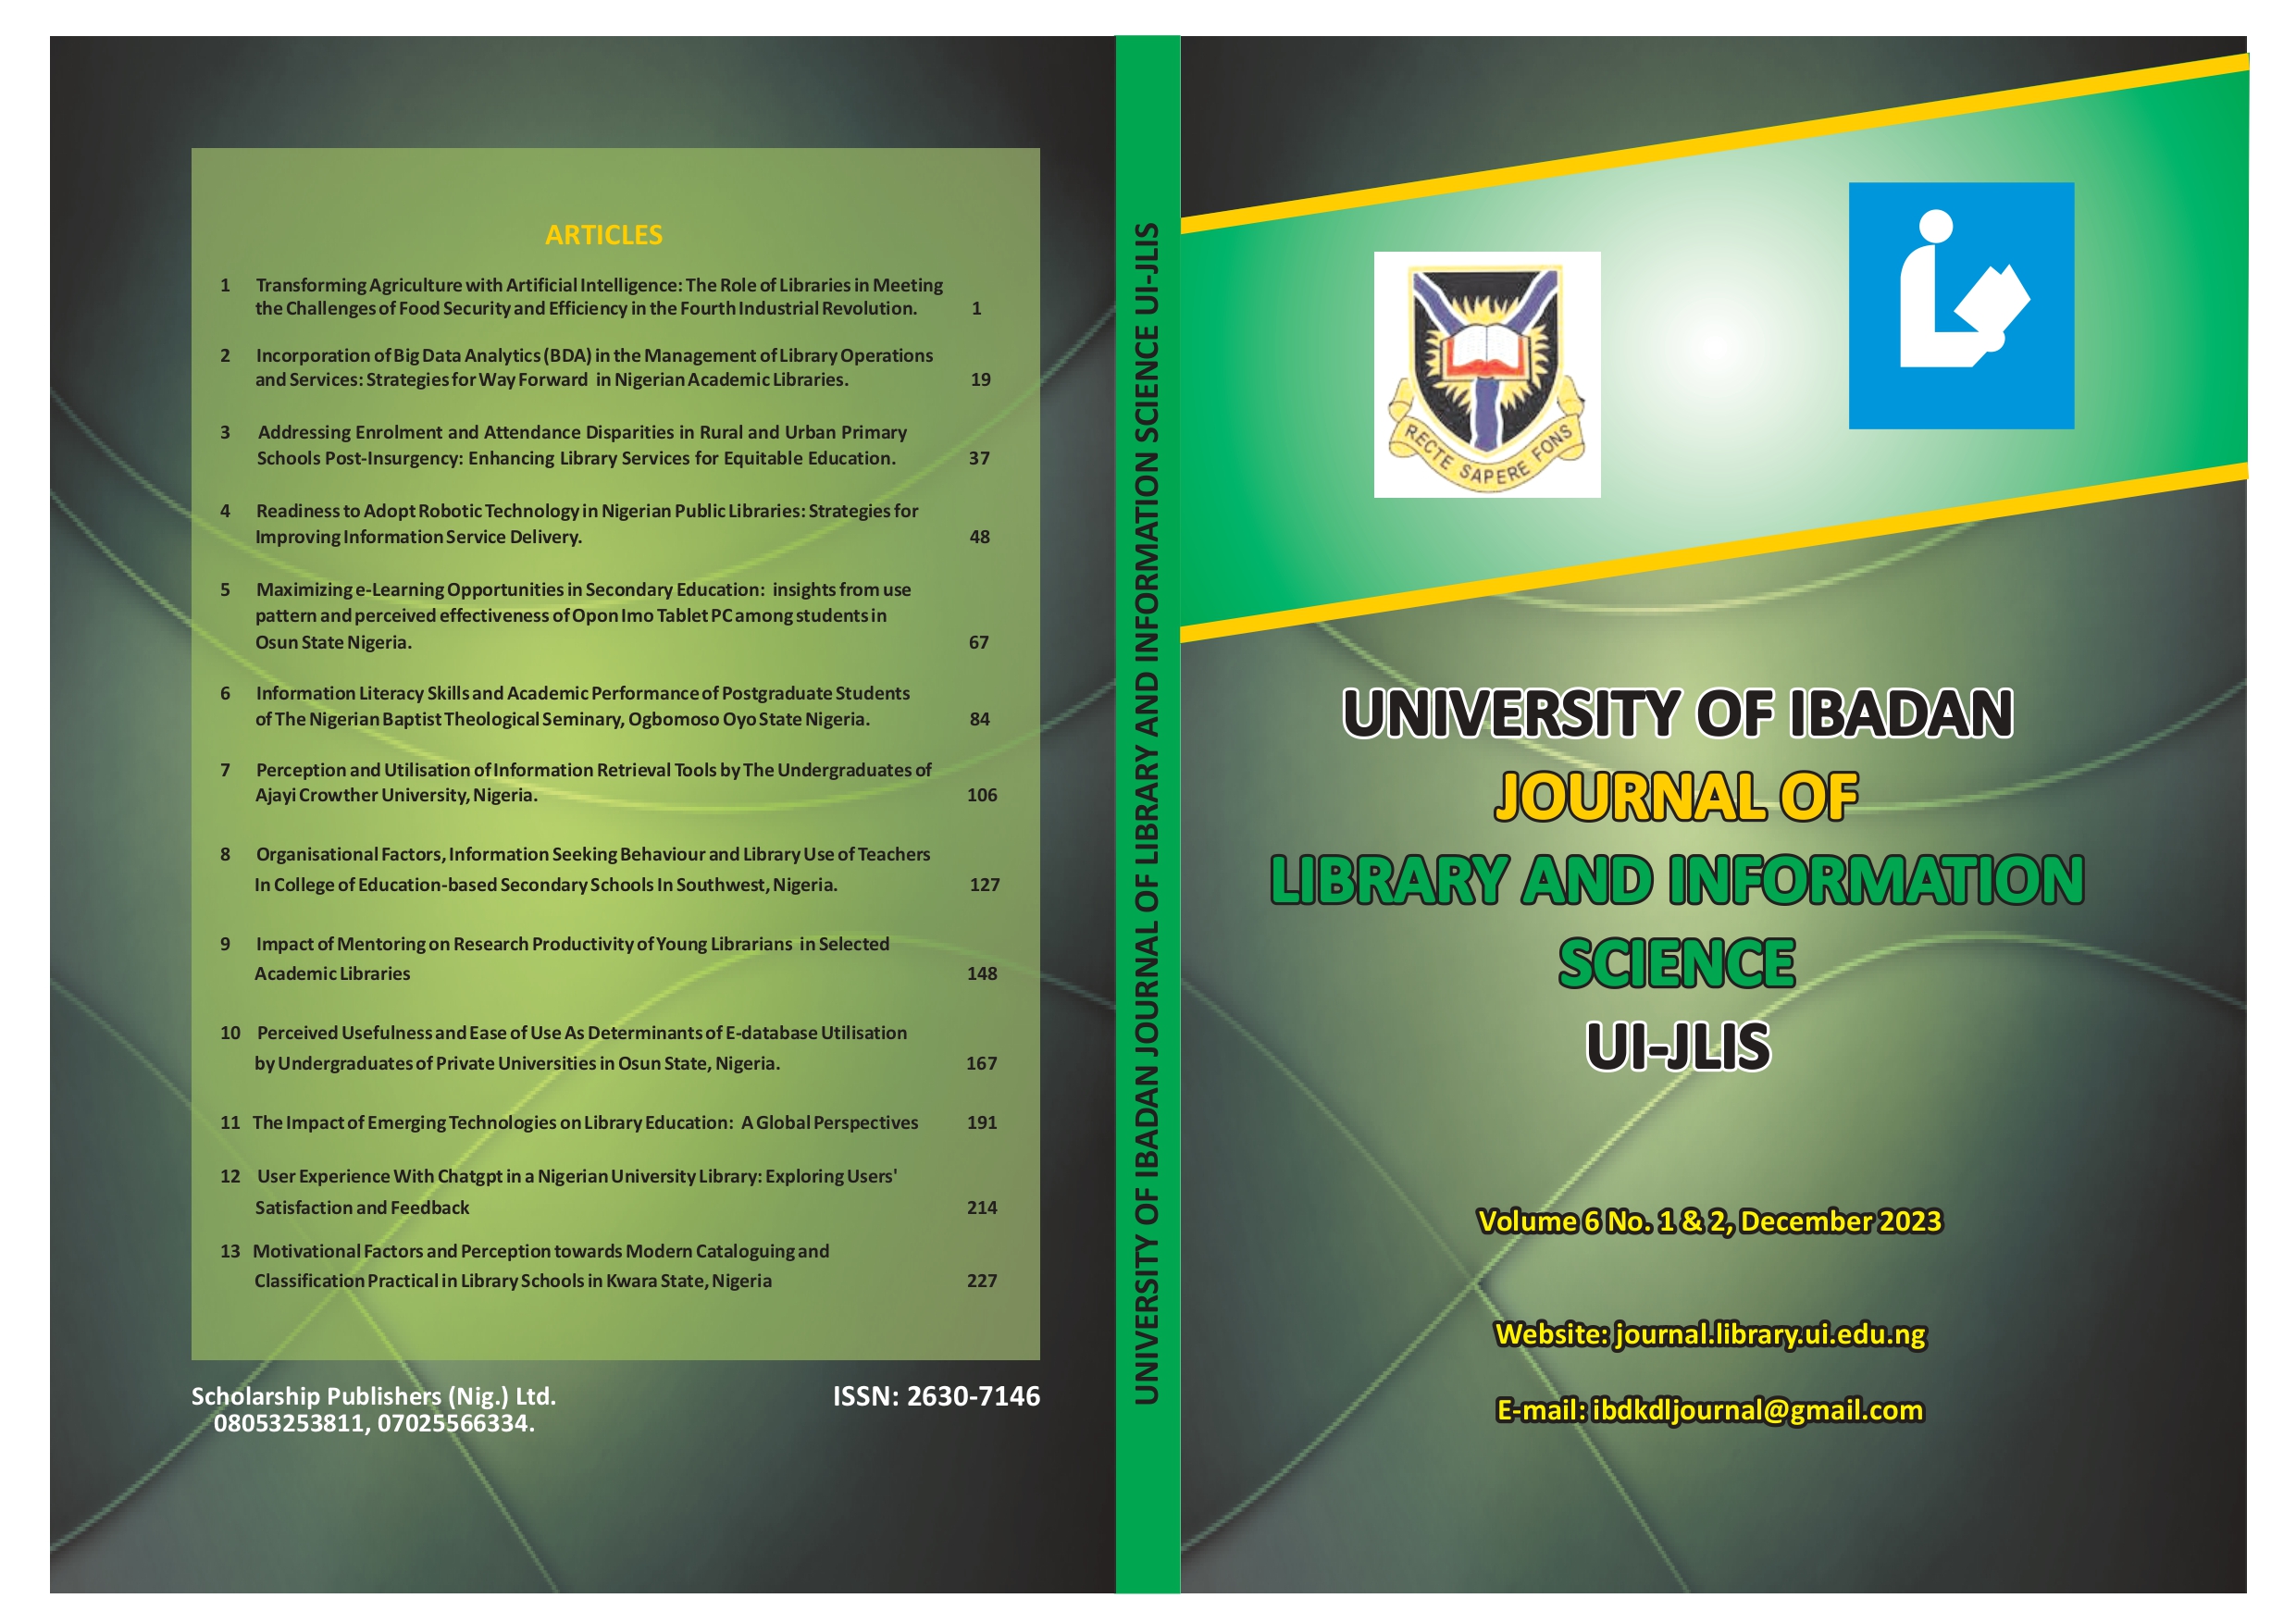 					View Vol. 6 No. 2 (2023): UNIVERSITY OF IBADAN JOURNAL OF LIBRARY AND INFORMATION SCIENCE
				